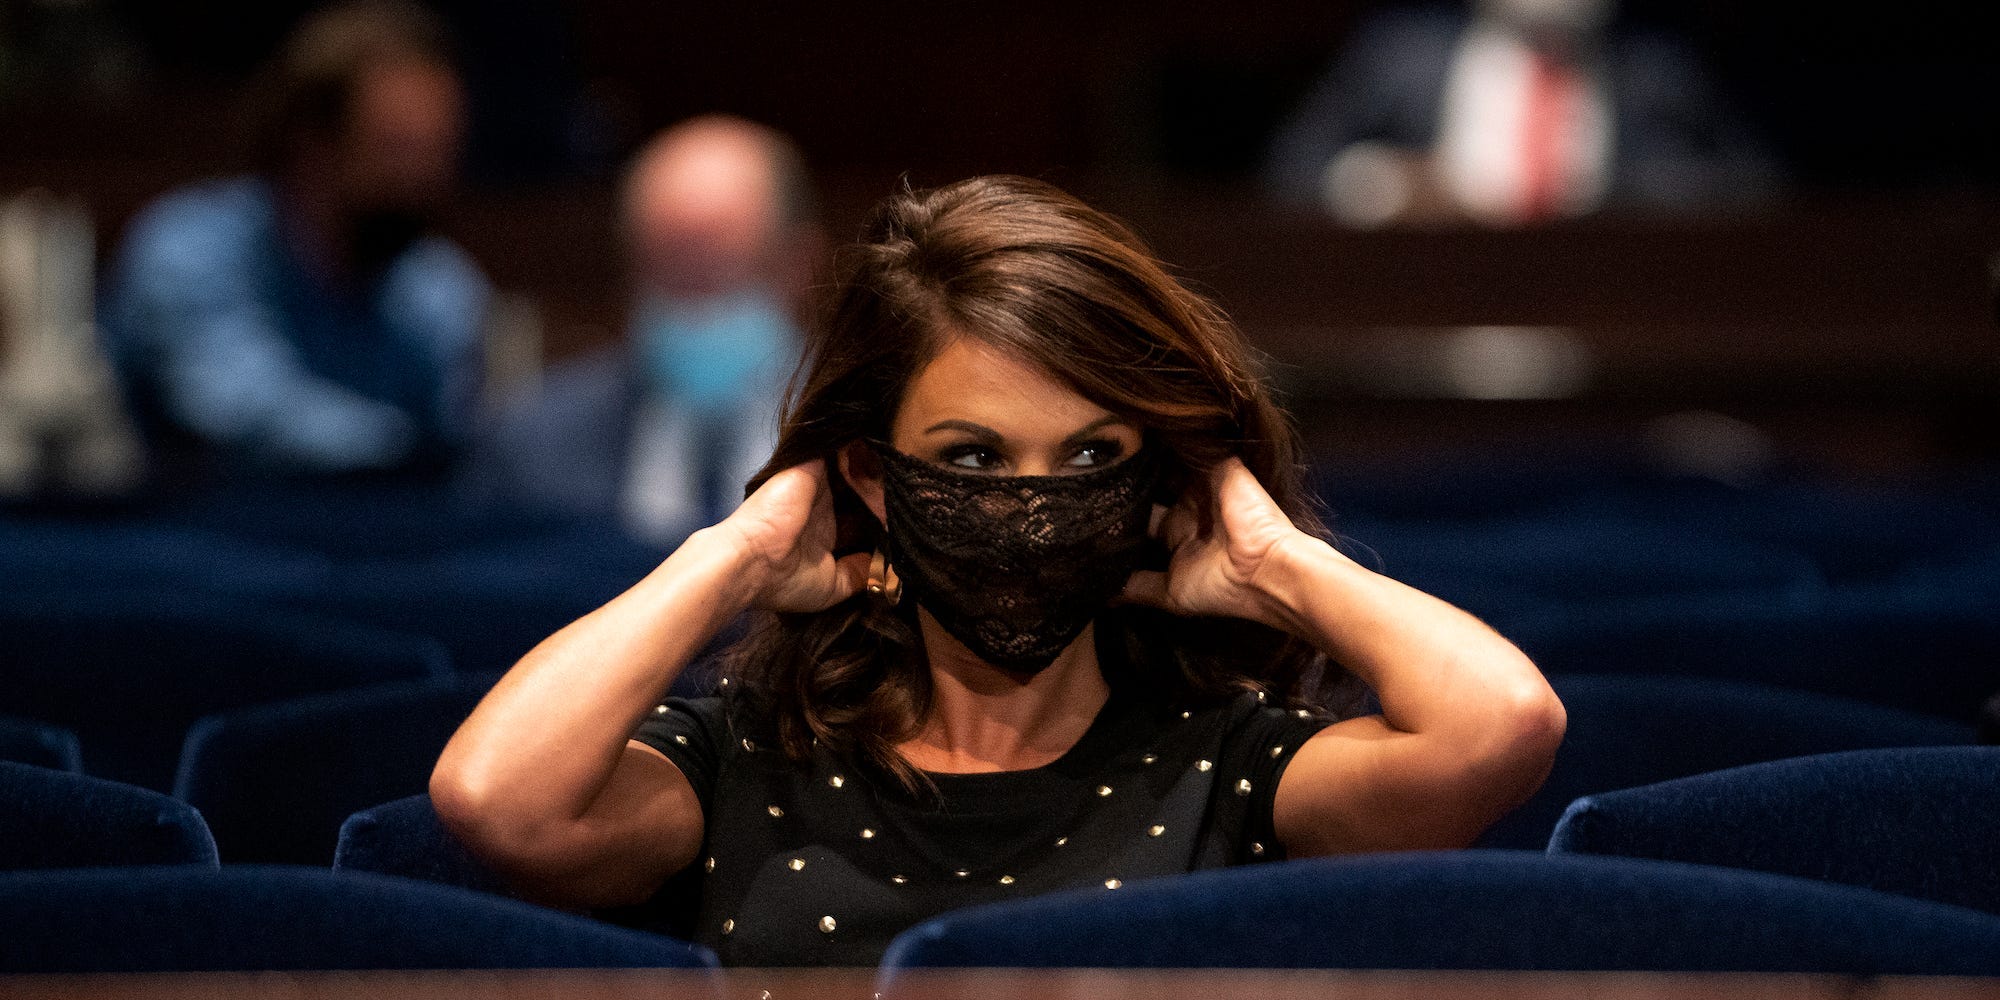 Rep. Lauren Boebert puts on a transparent mask after a reminder from Chairman Rep. Jerrold Nadler at a House Judiciary Committee hearing on October 21, 2021.